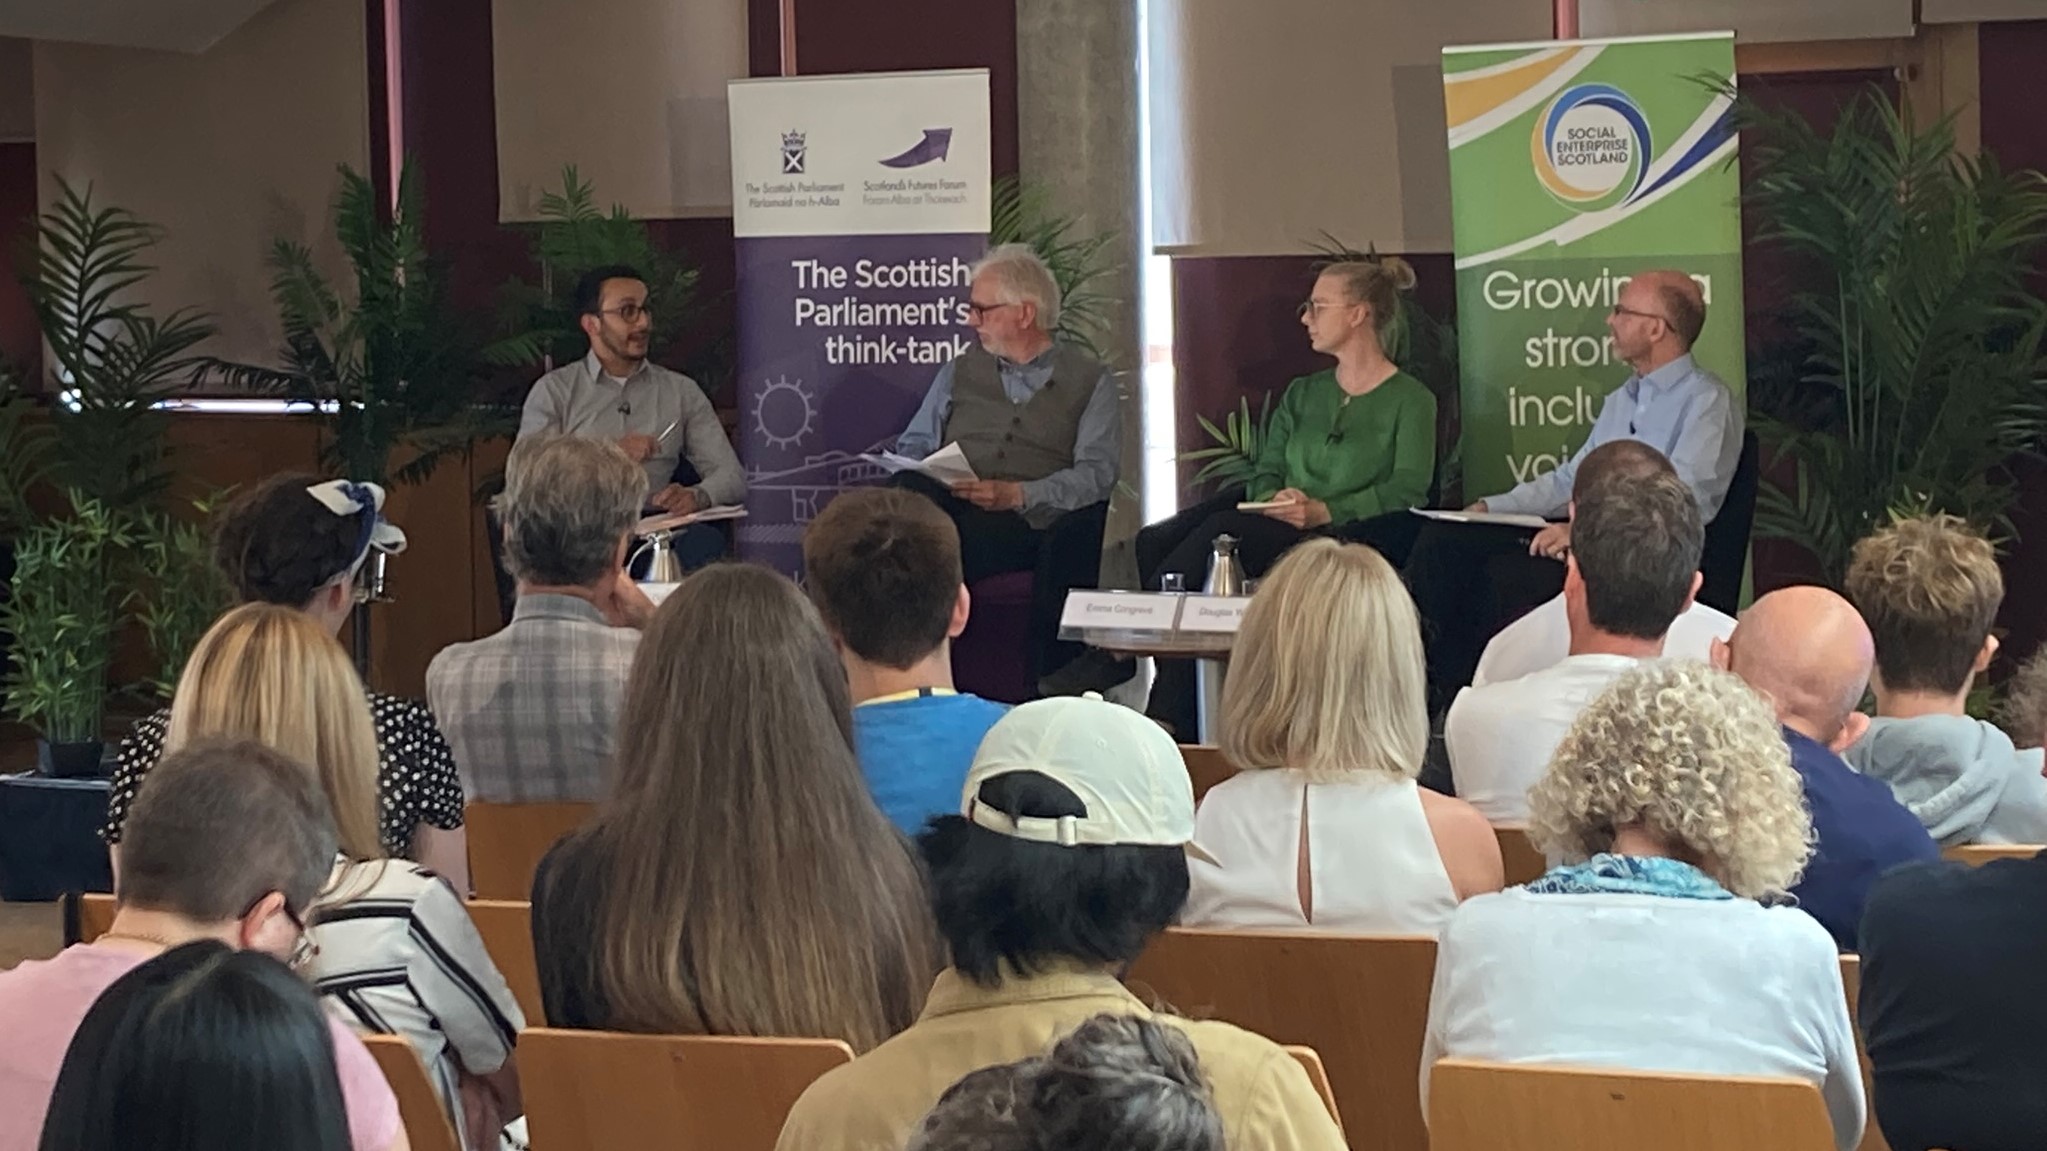 Panel of speakers in a room at the Scottish Parliament